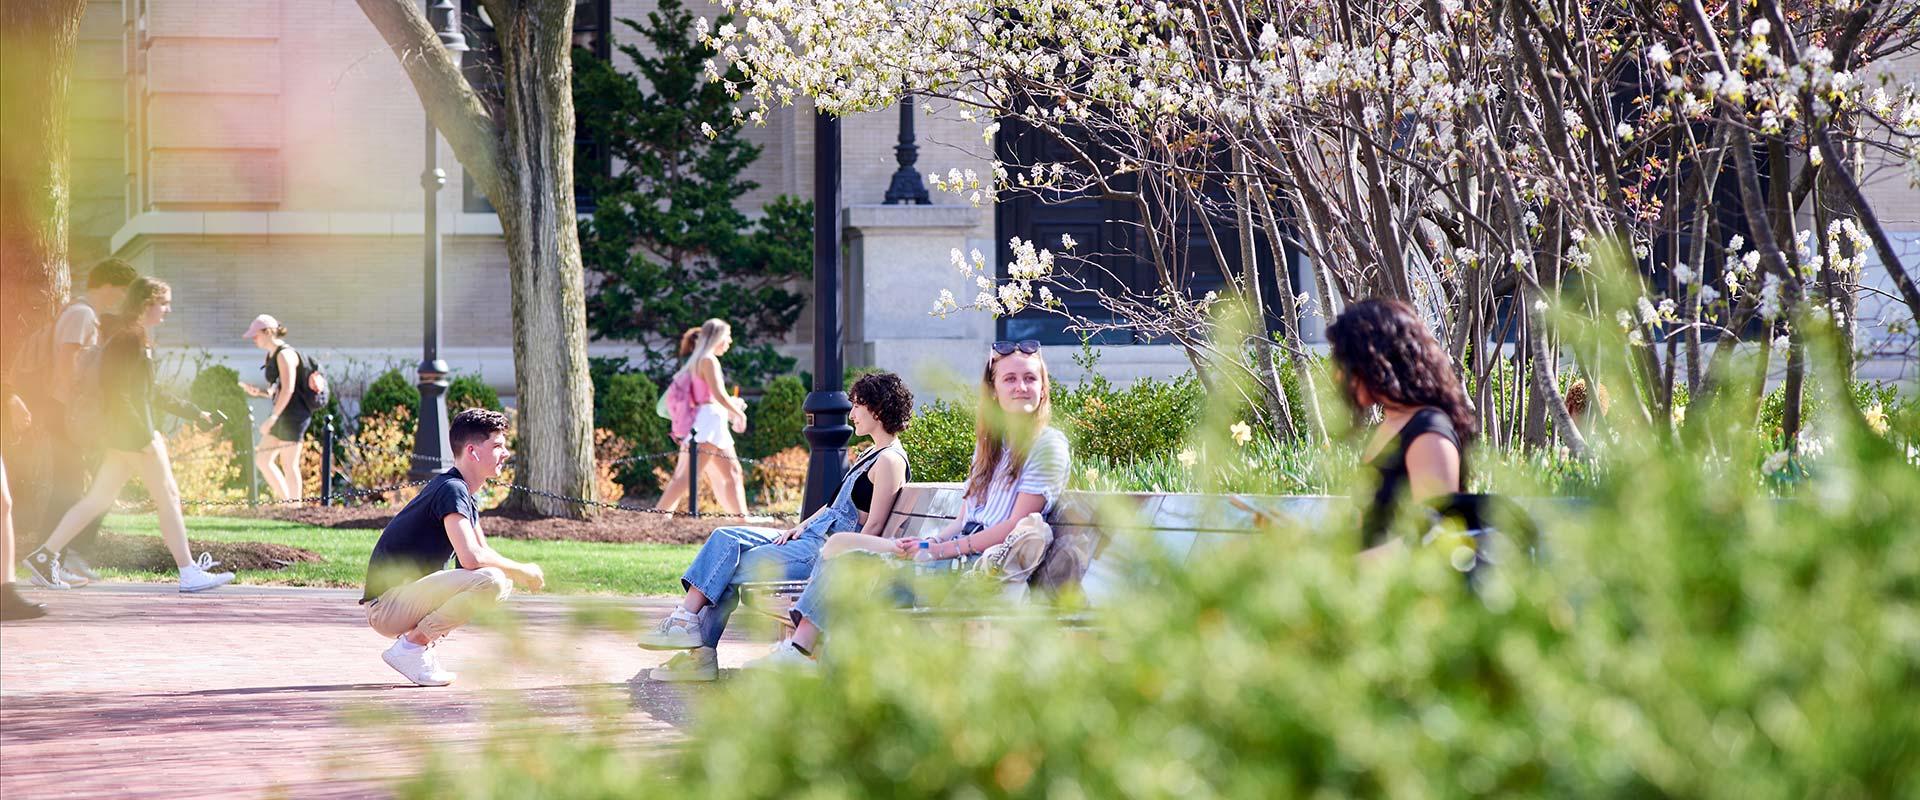 students visit between classes on the west side of campus